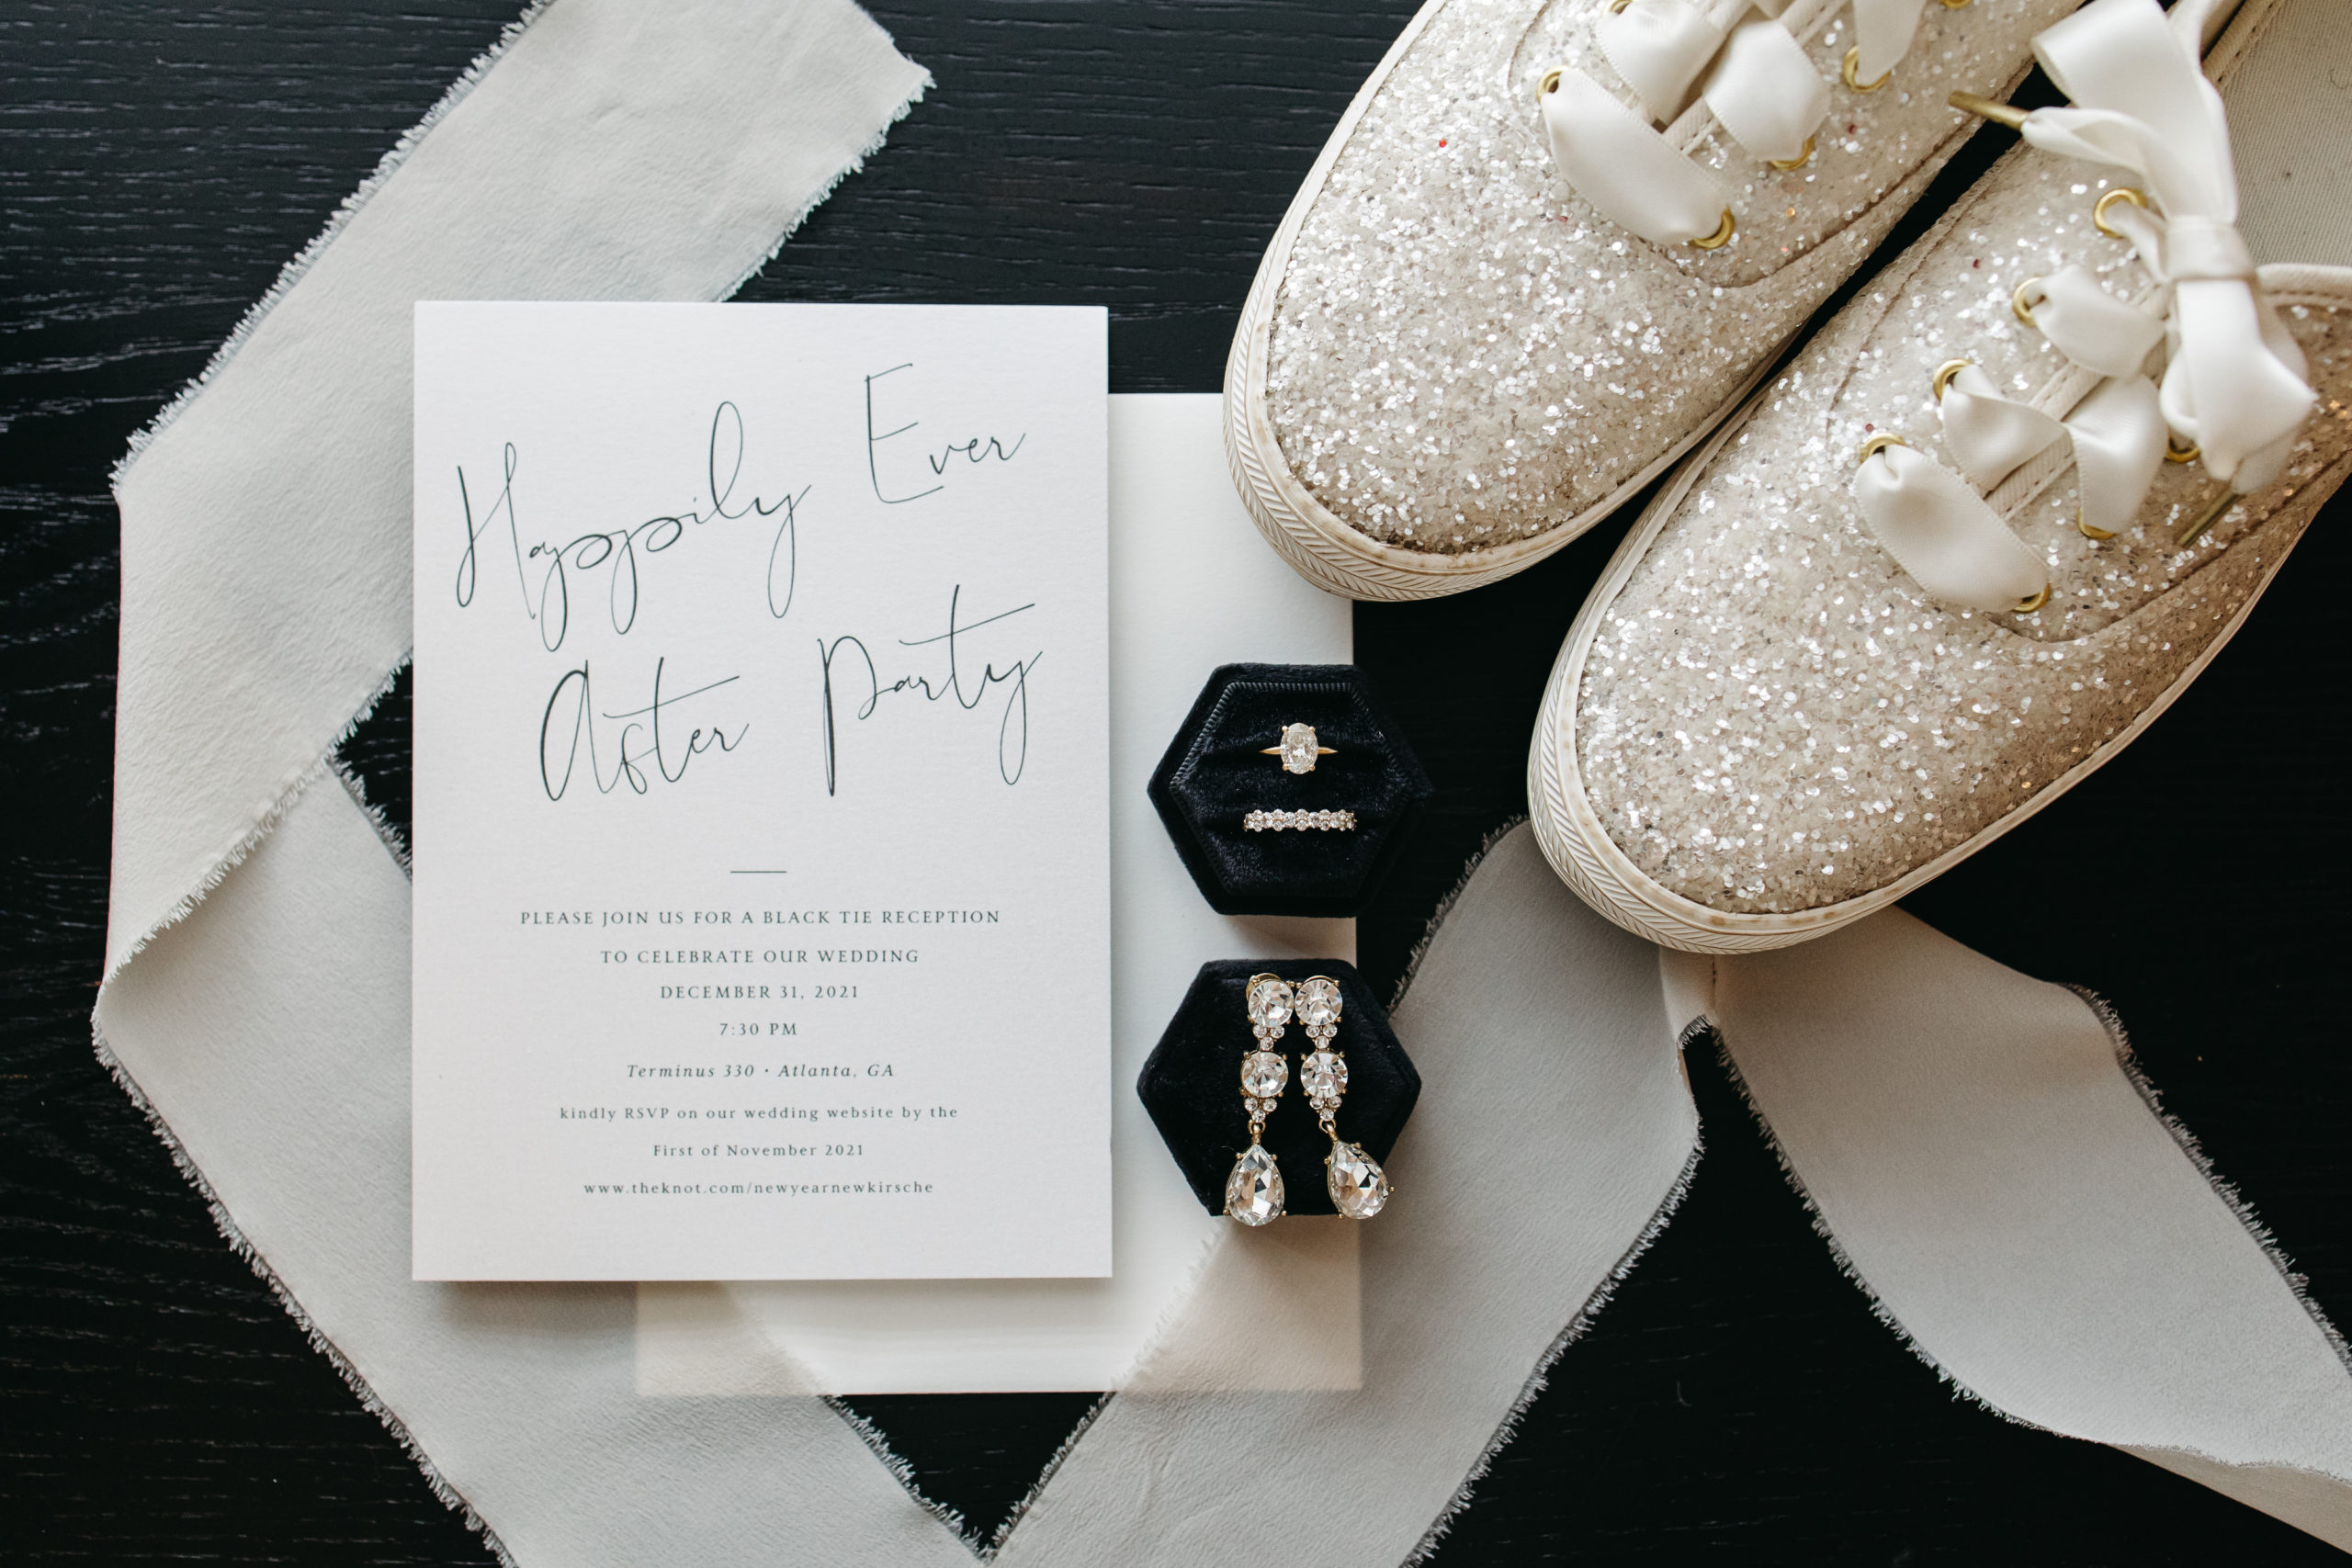 Wedding details with stationery and bridal jewelry and shoes